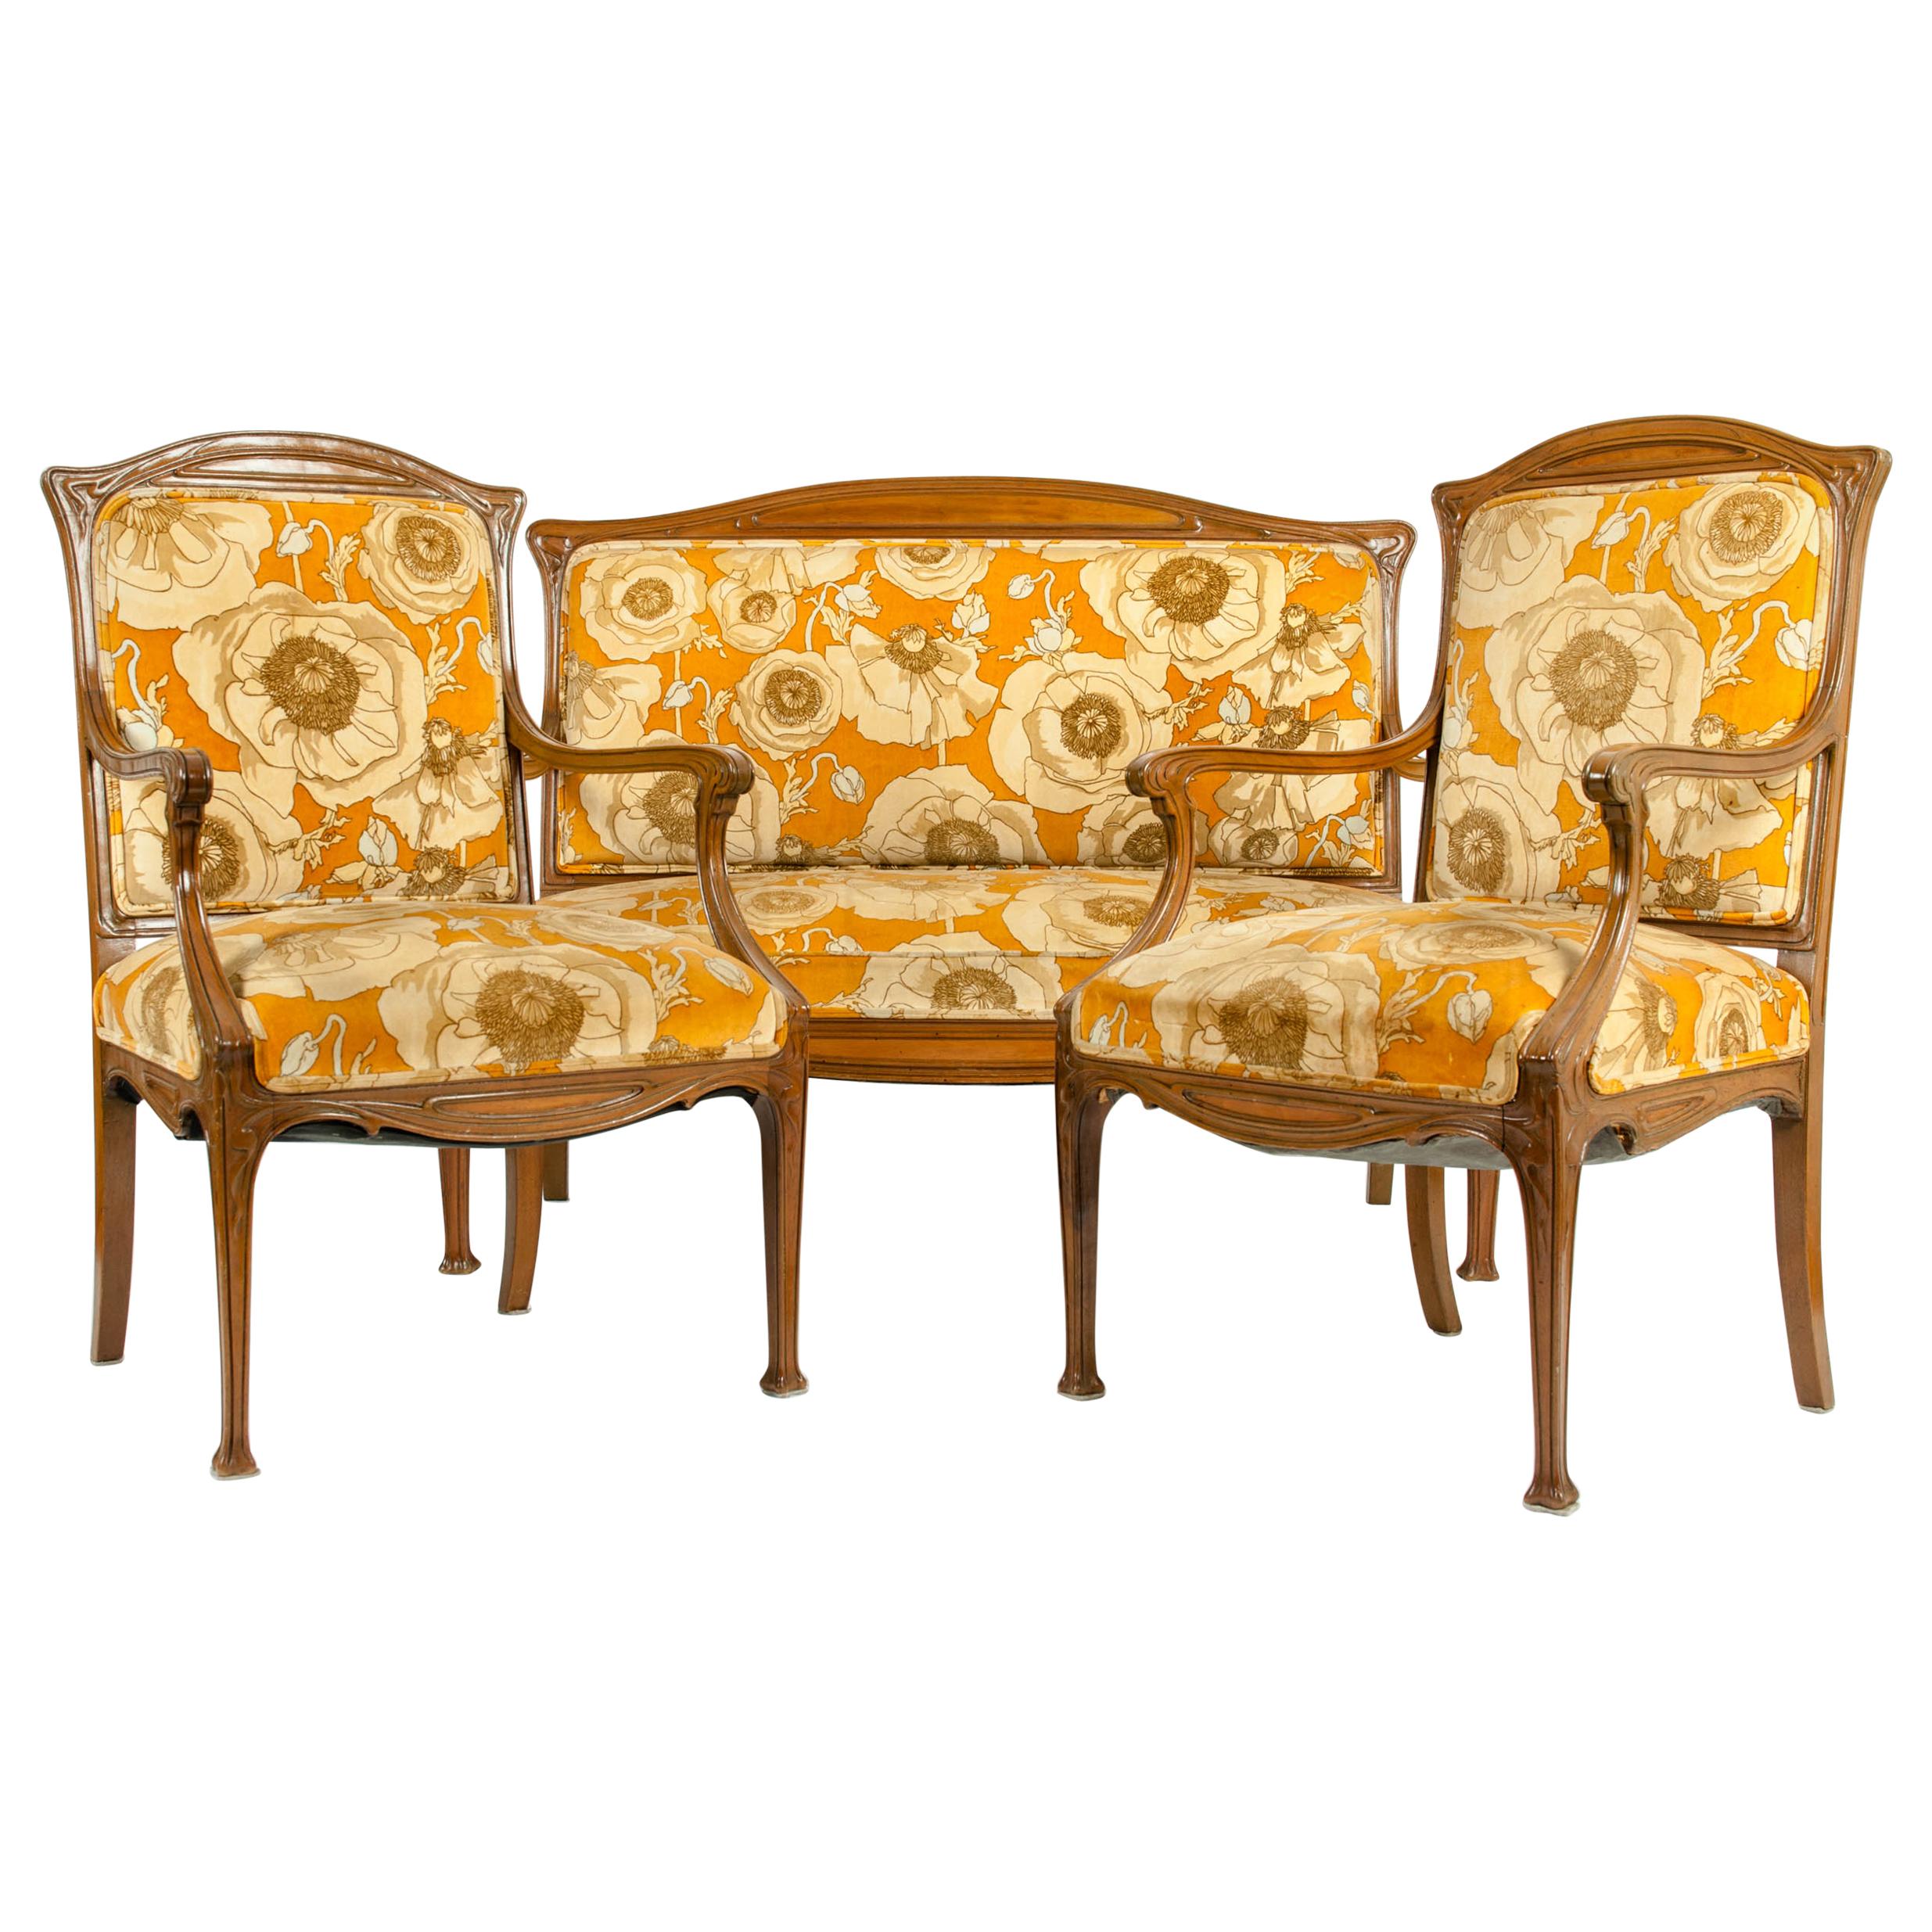 Early 20th Century Louis Majorelle Three-Piece Seating Set